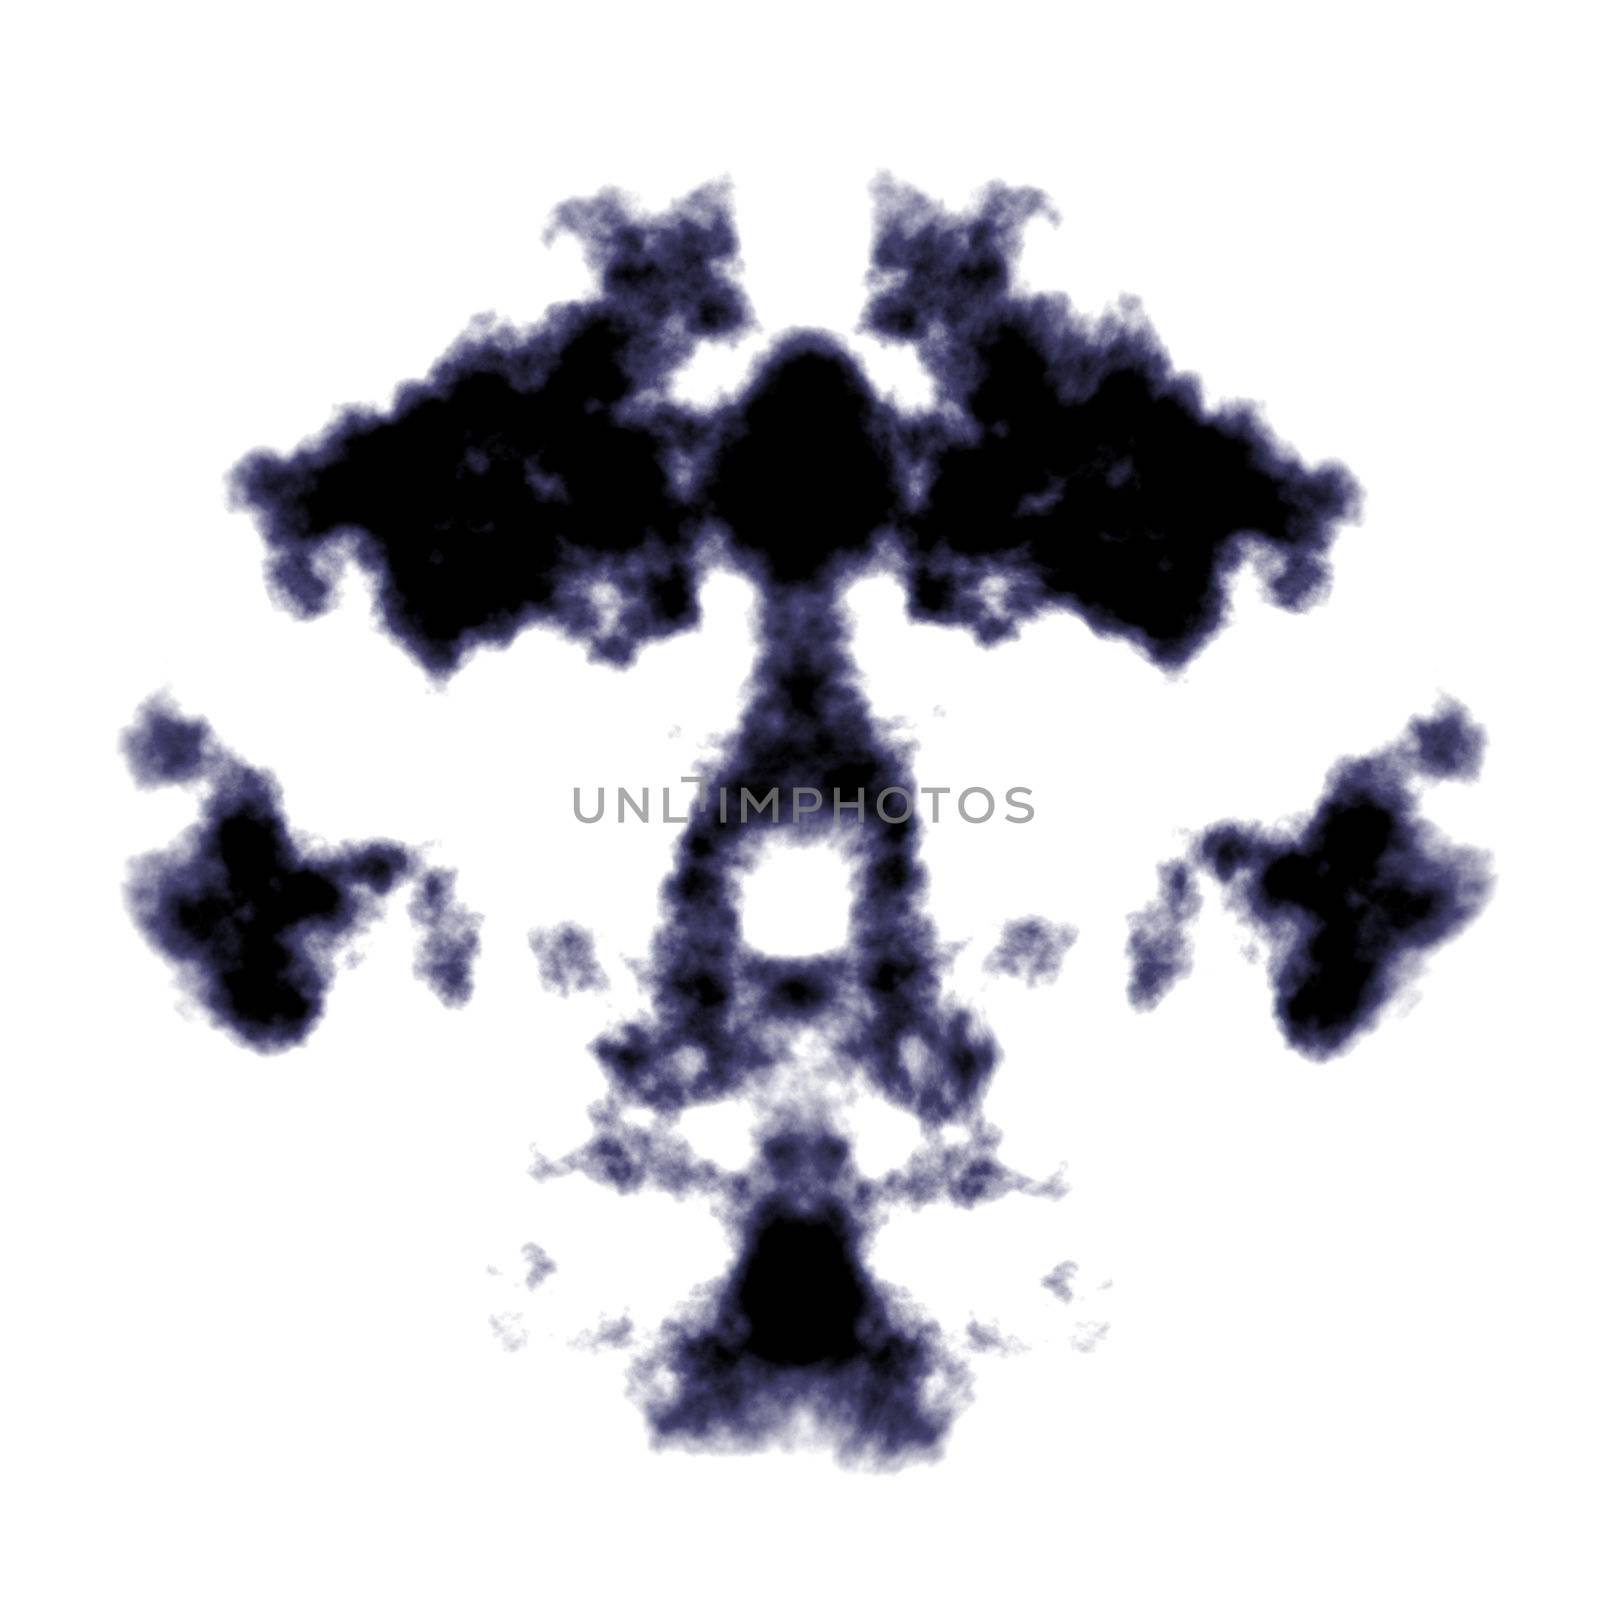 An illustration of a rorschach ink graphic